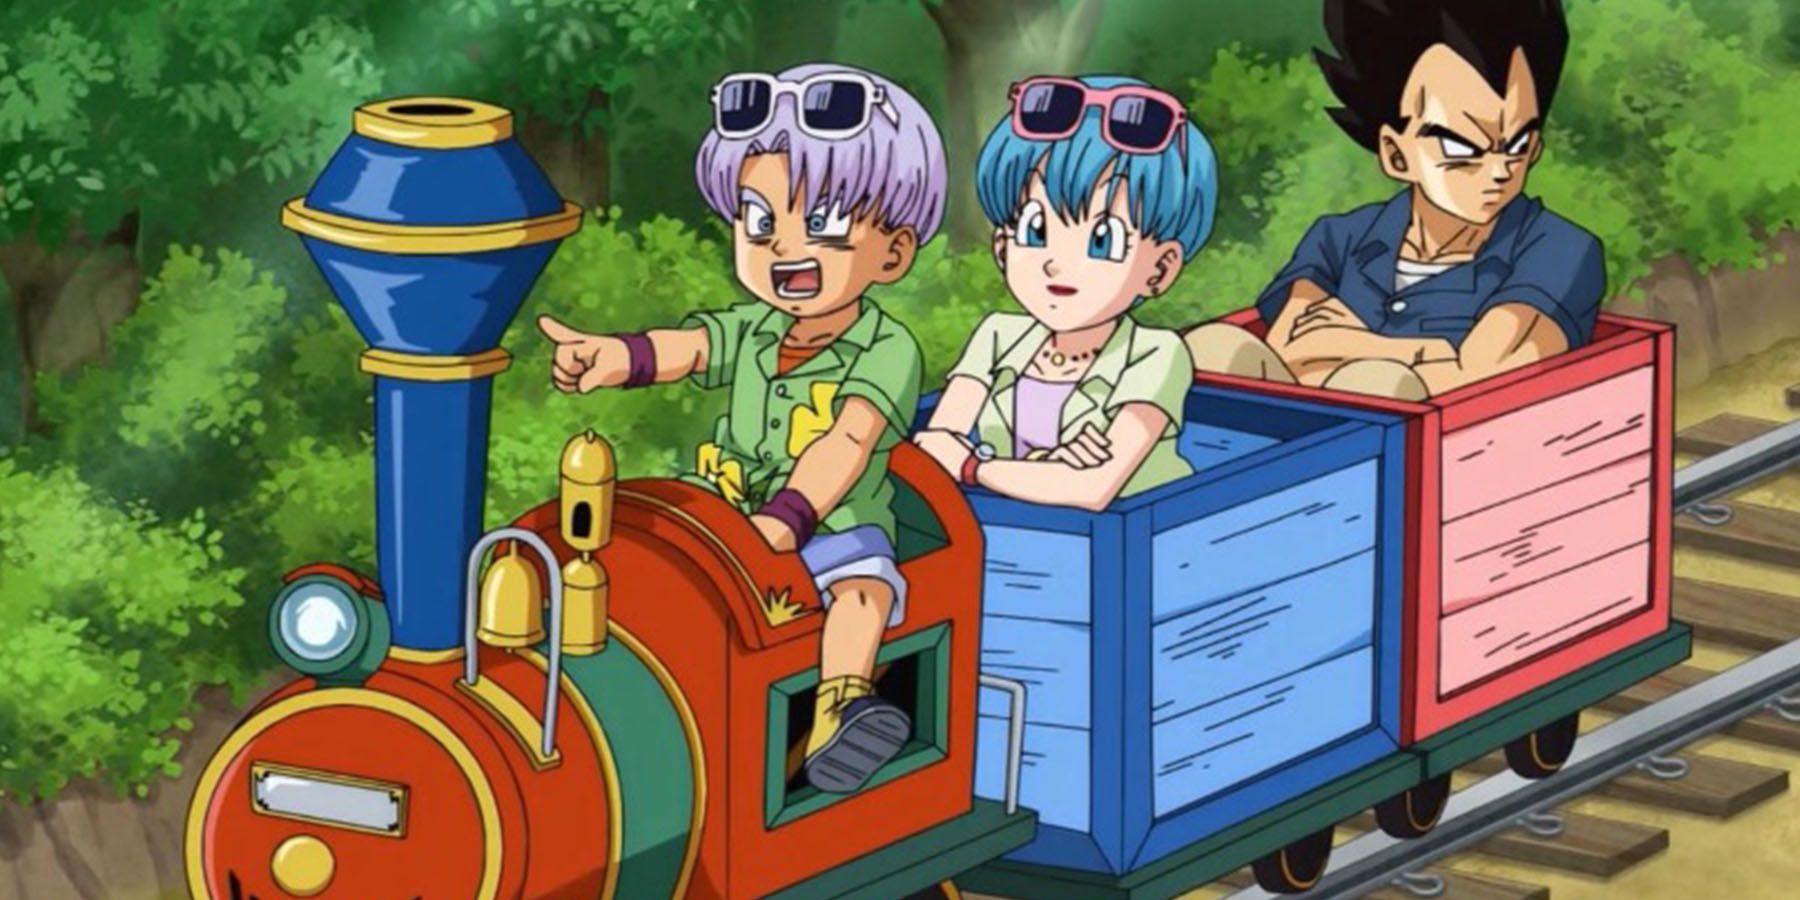 Vegeta, Bulma, and Trunks ride a train on vacation in Dragon Ball Super